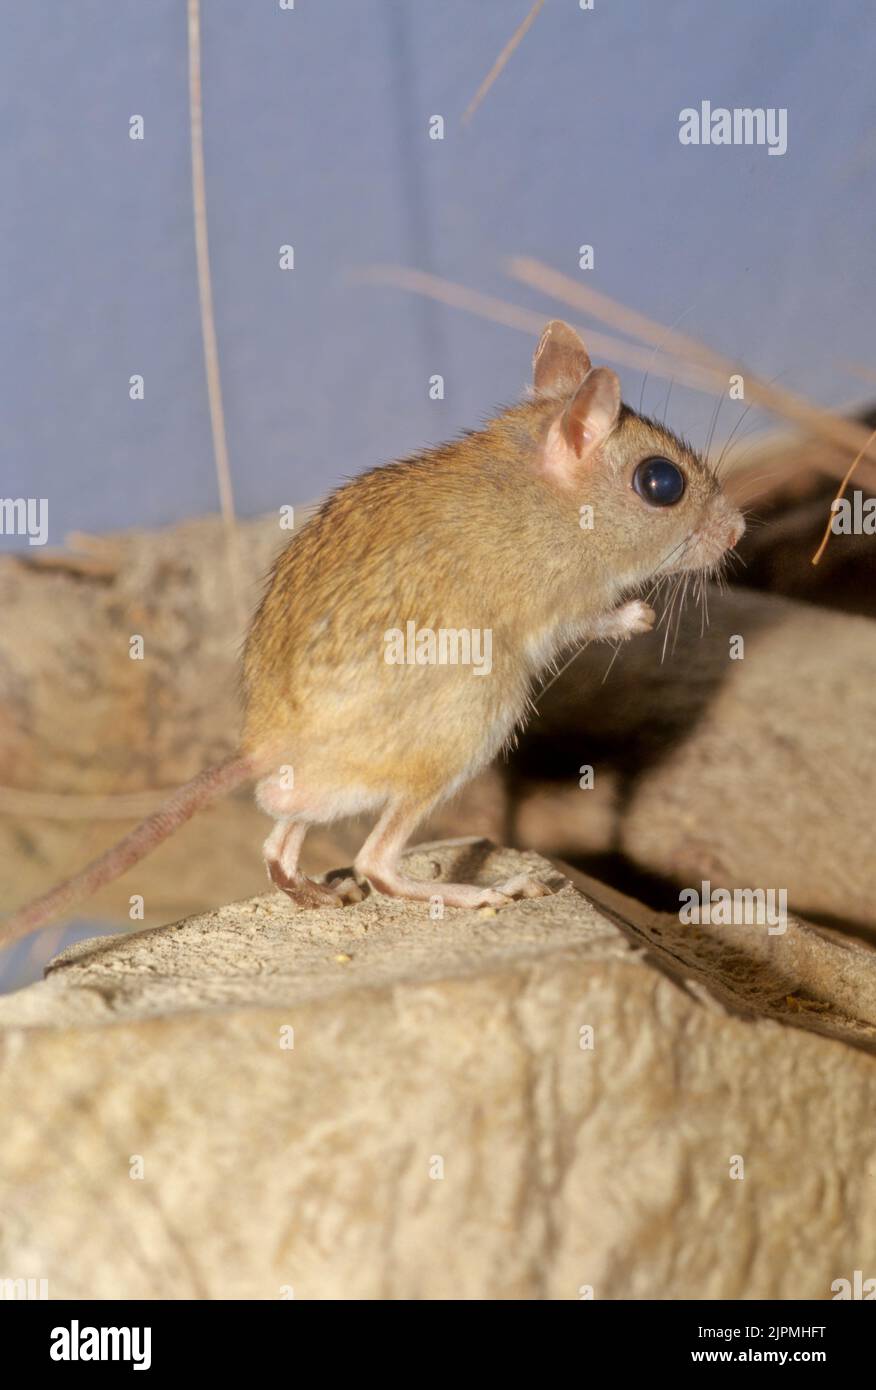 The northern hopping mouse (Notomys aquilo) is a species of rodent in the family Muridae. Stock Photo